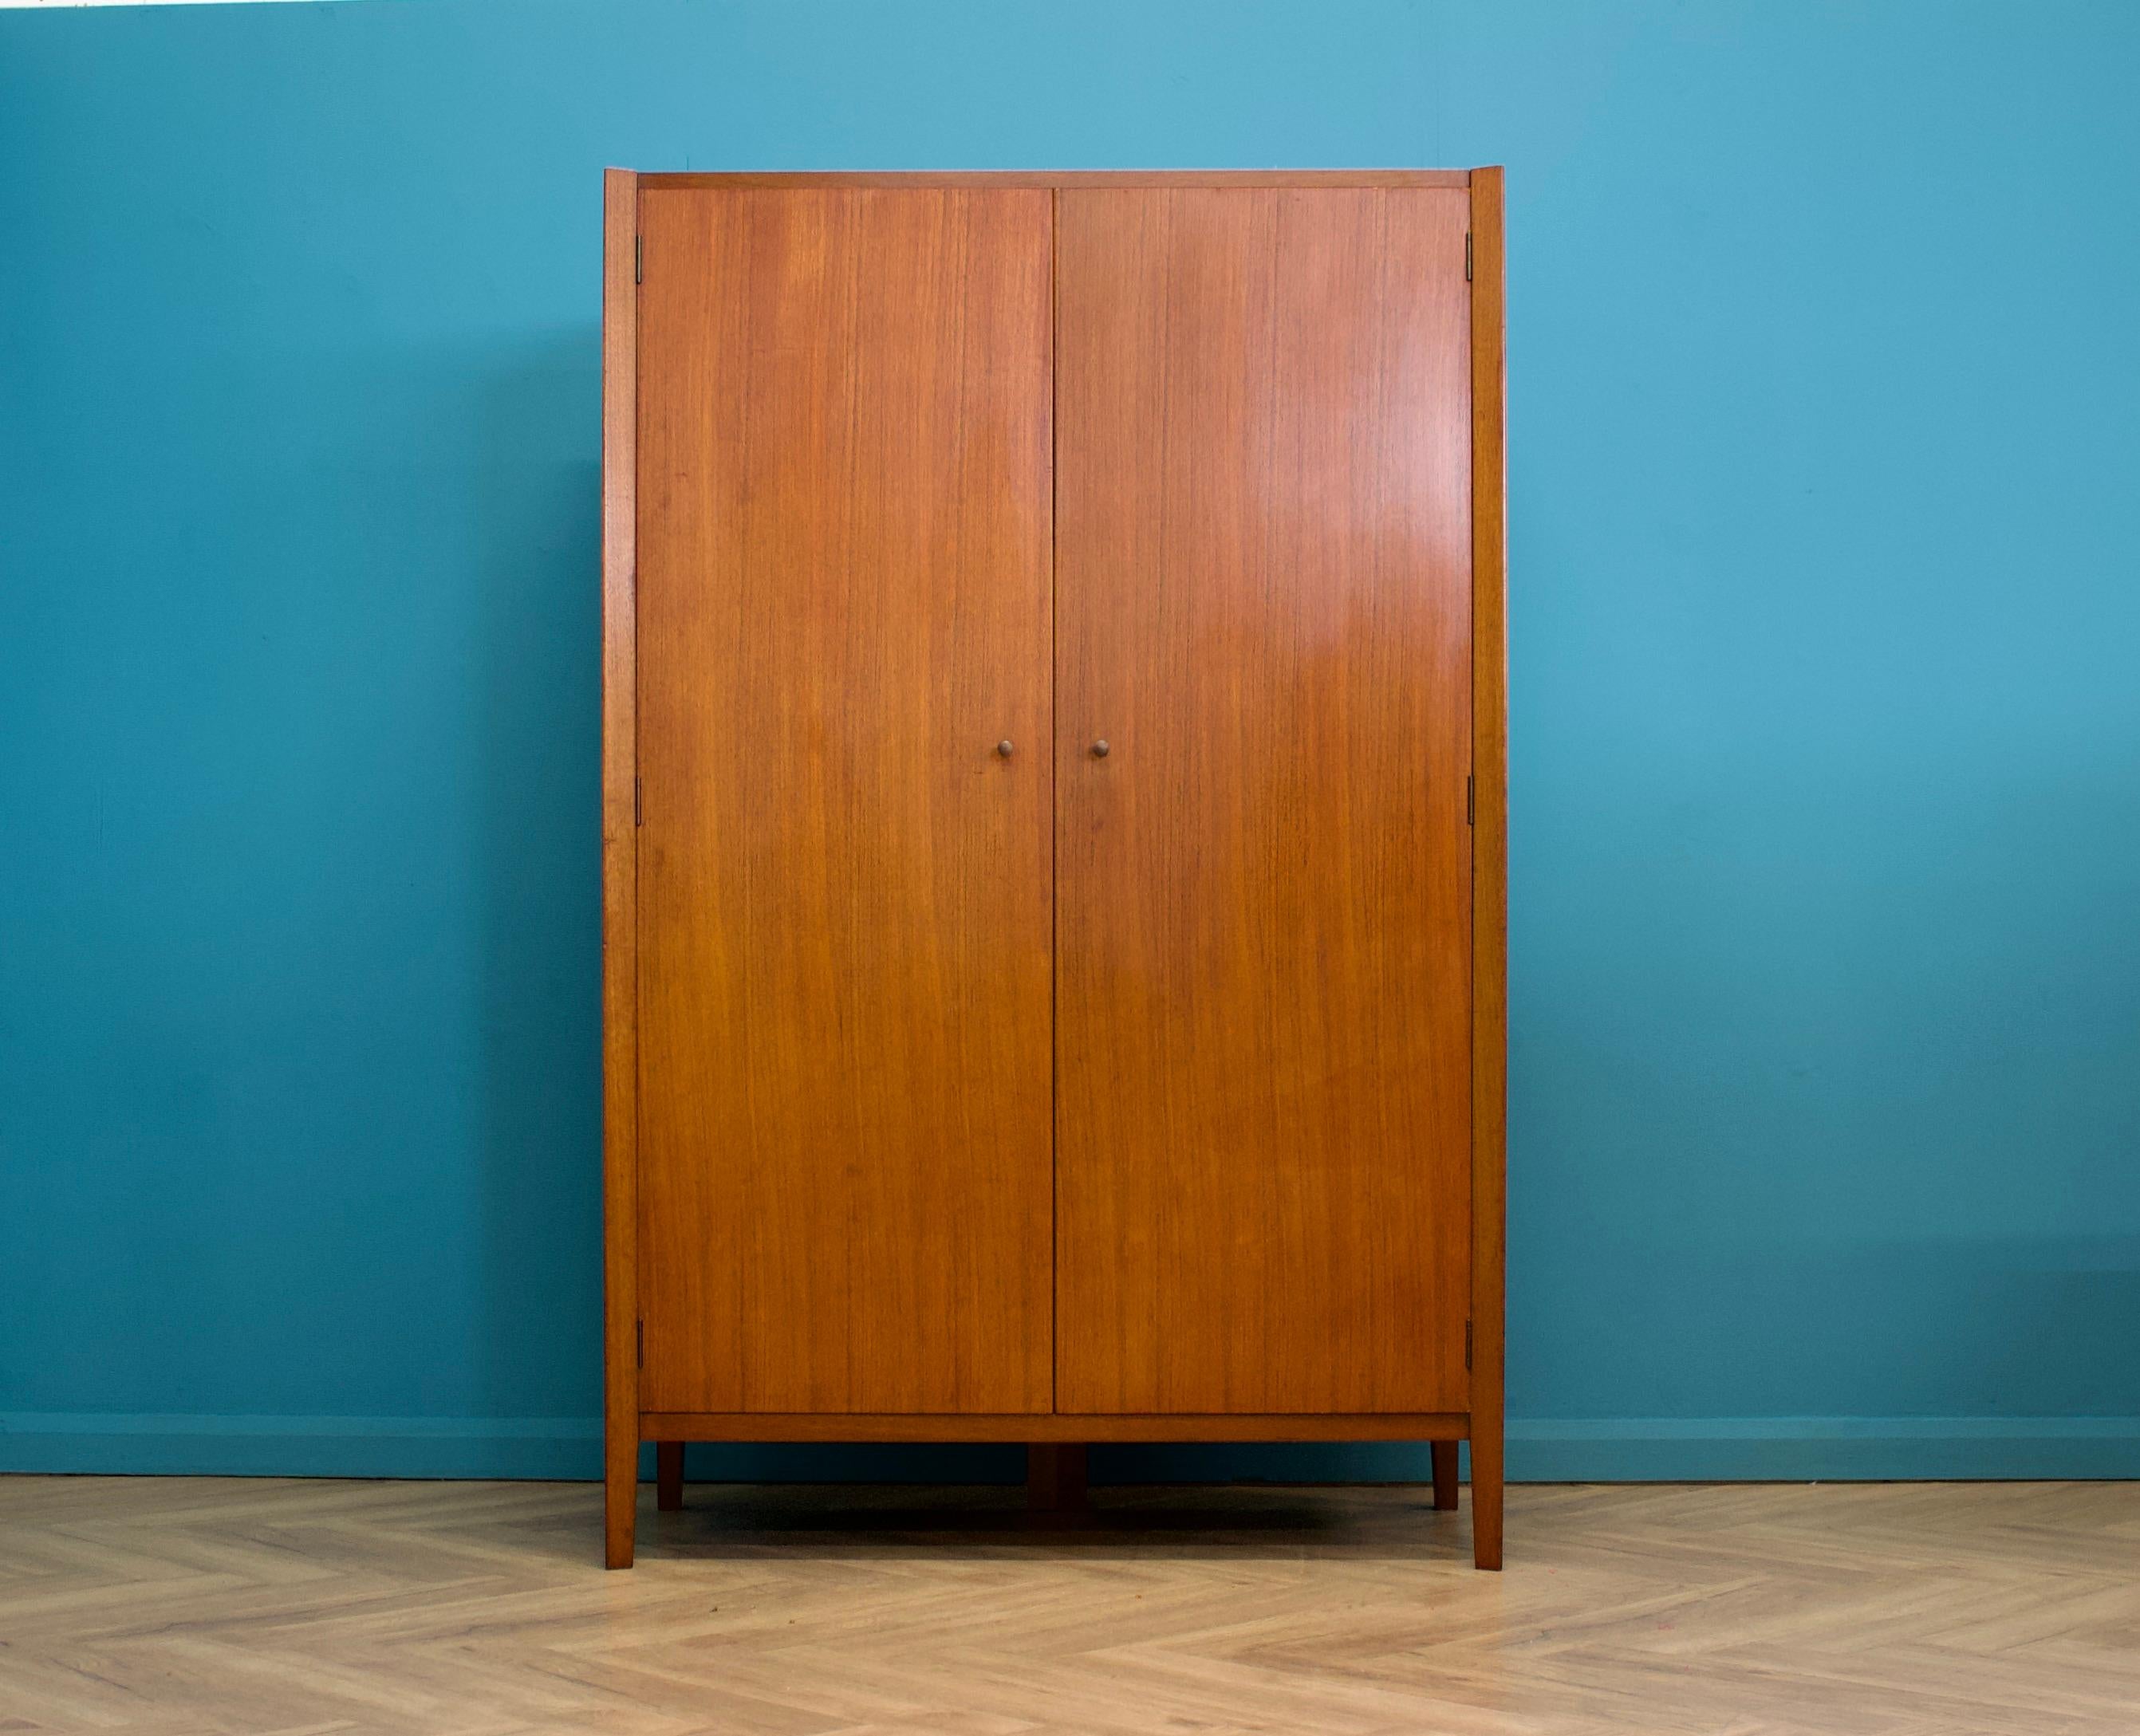 A rarely seen, freestanding double door teak wardrobe from Gordon Russell  - in the Danish modern style
The quality is exceptional
Made during the 1960s Fitted out with two clothes rail and fixed shelving for ample storage.
The style of this